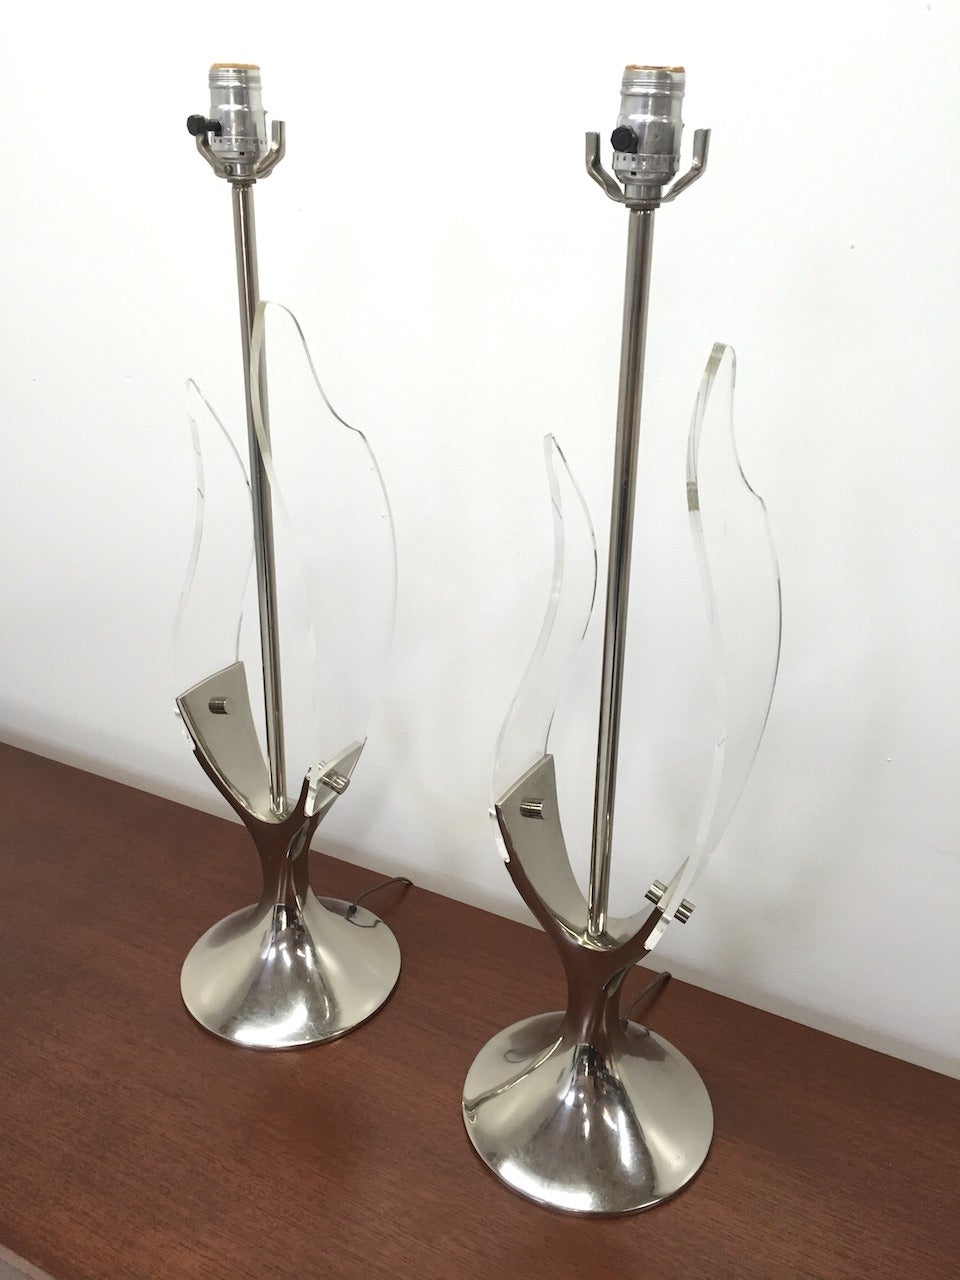 Exceptional Pair of Chrome and Lucite Table Lamps by Laurel Lamp Co. For Sale 2